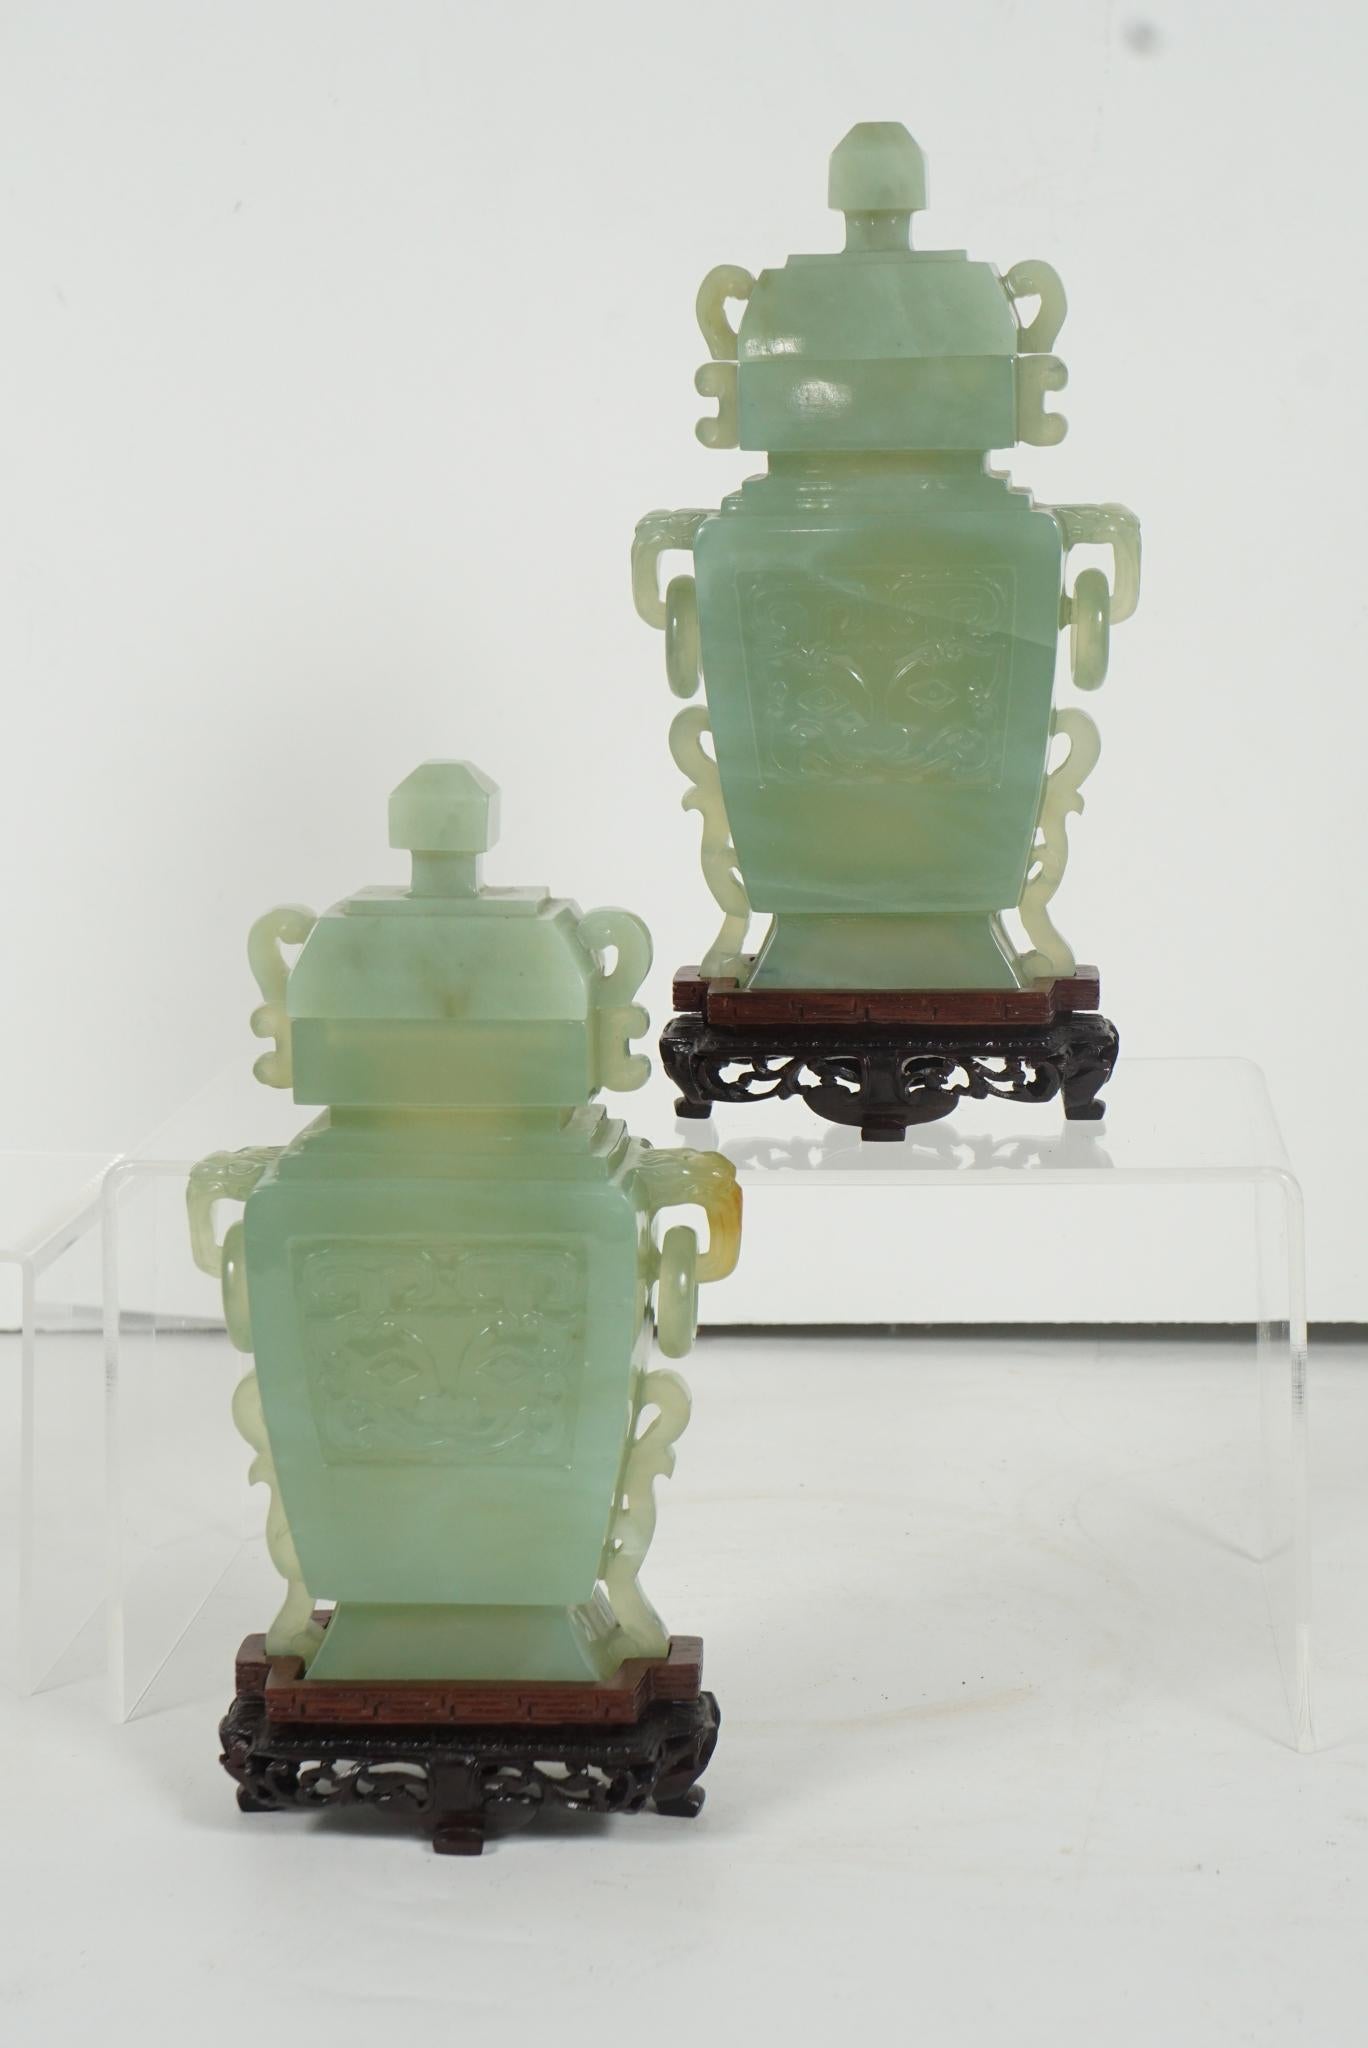 This nice pair of carved lidded urns are made form Bowenite which is considered a semiprecious stone and thought to resemble jade. They were carved in the mid 20th century and come with accompanying rosewood stands of fine Chinese design. They are